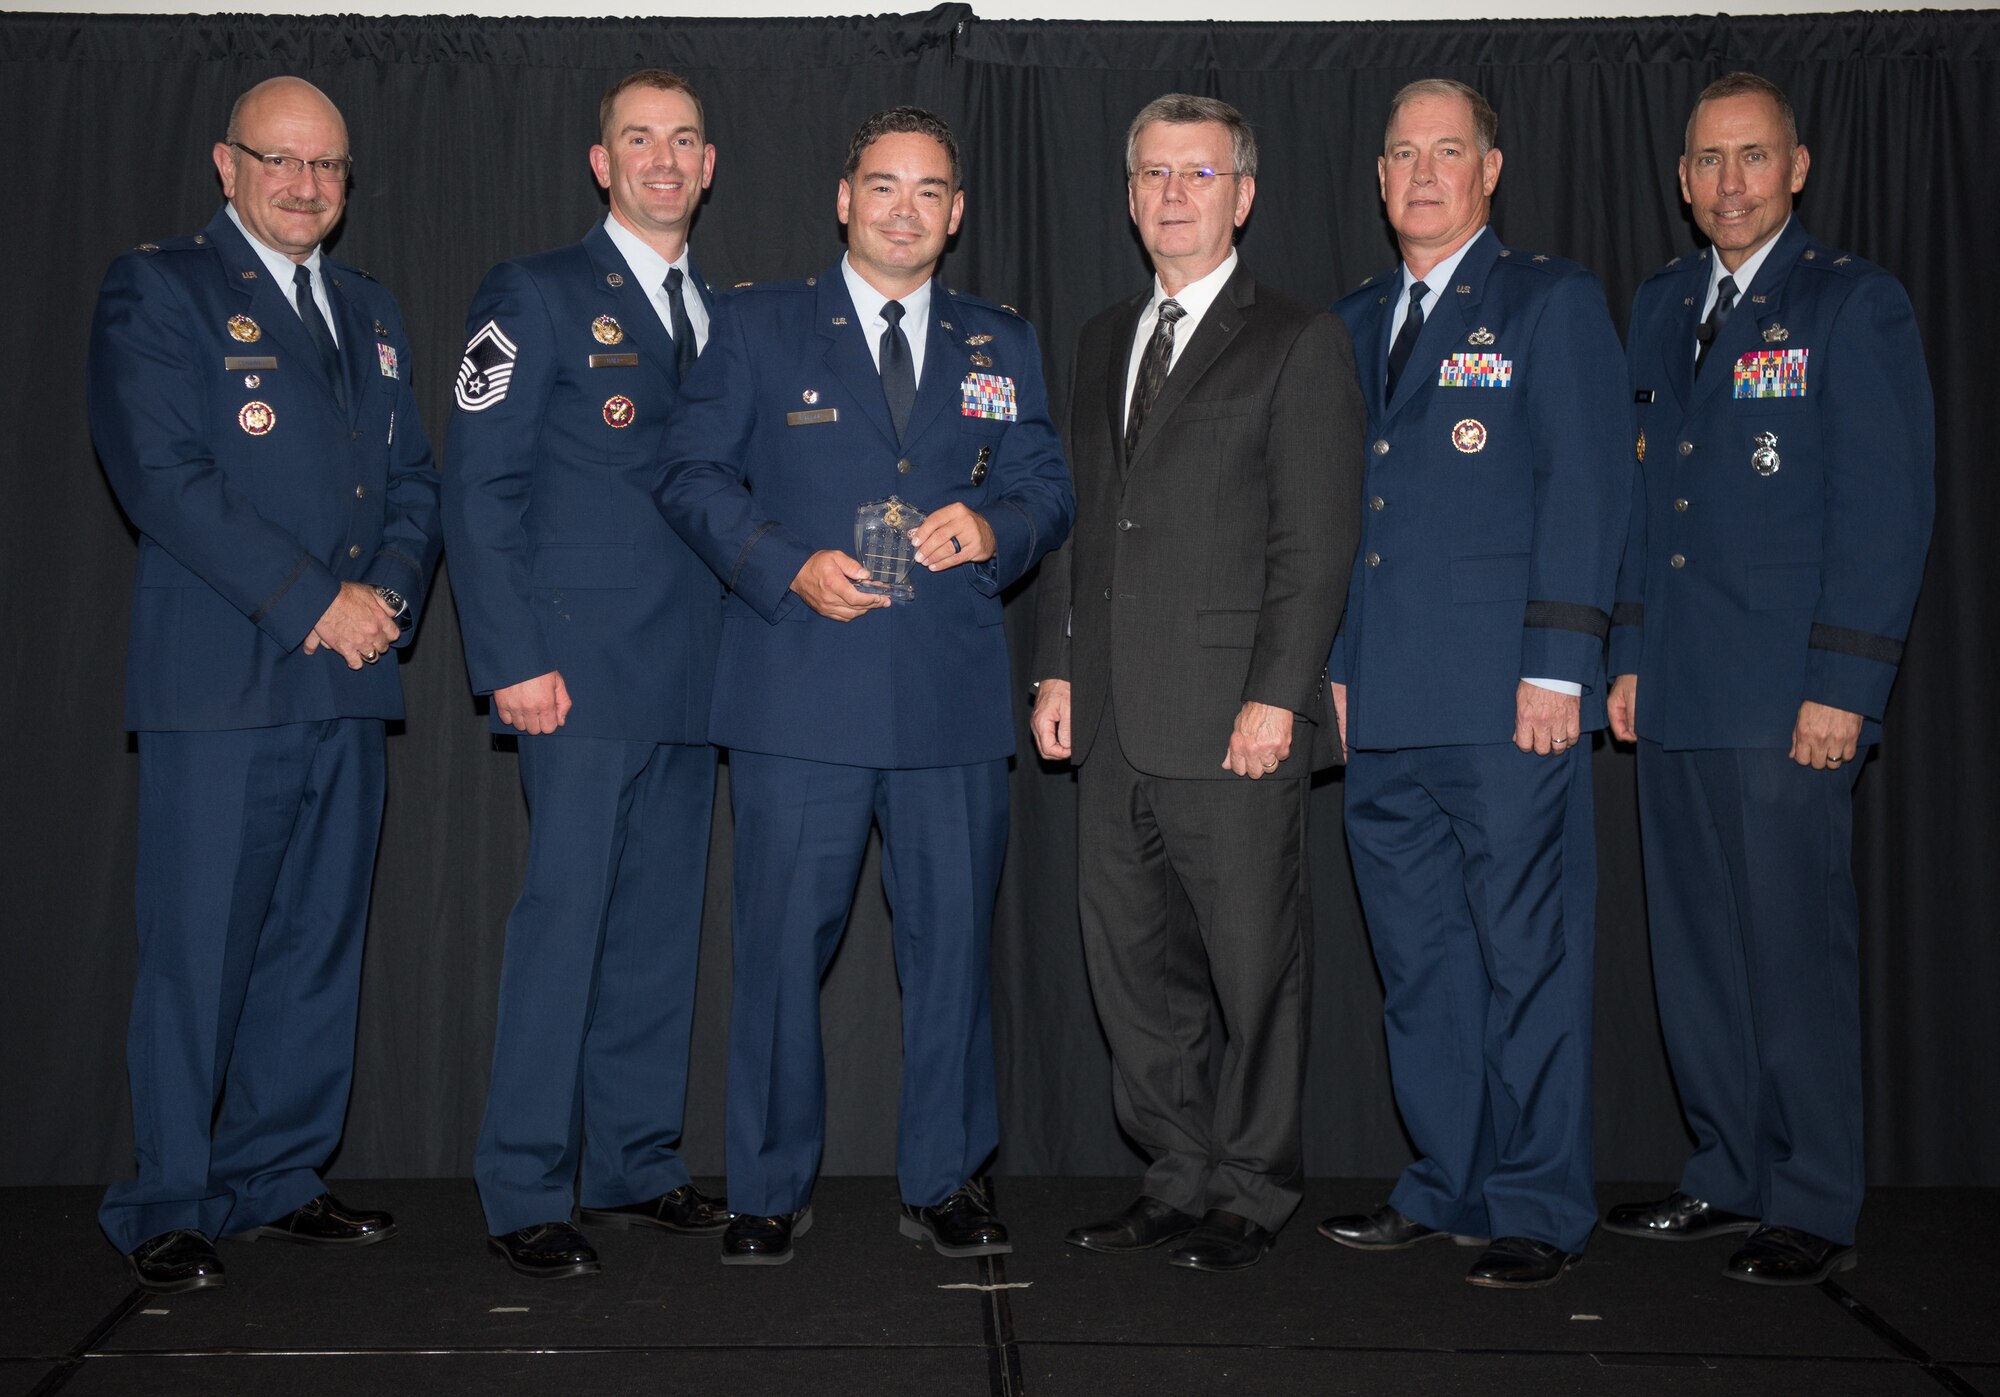 Maj. Shawn Stroup, 101st Security Forces Squadron (101st SFS), Bangor International Airport, Maine, receives the Air National Guard Outstanding Air Reserve Component Security Forces Senior Noncommissioned Officer of 2017 Award on behalf of the actual recepient, Master Sgt. Walter Dow, 101st SFS, at the 2018 Air National Guard Security Forces Squadron Dinner and Awards Banquet at the National Center for Employee Development Conference Center in Norman, Oklahoma, Sept. 12, 2018. Every year, leadership from all of the Air National Guard security forces squadrons meet in one place to discuss past, current and upcoming topics that impact the career field, as well as recognize outstanding security forces Airmen. (U.S. Air National Guard Photo by Staff Sgt. Kasey M. Phipps)